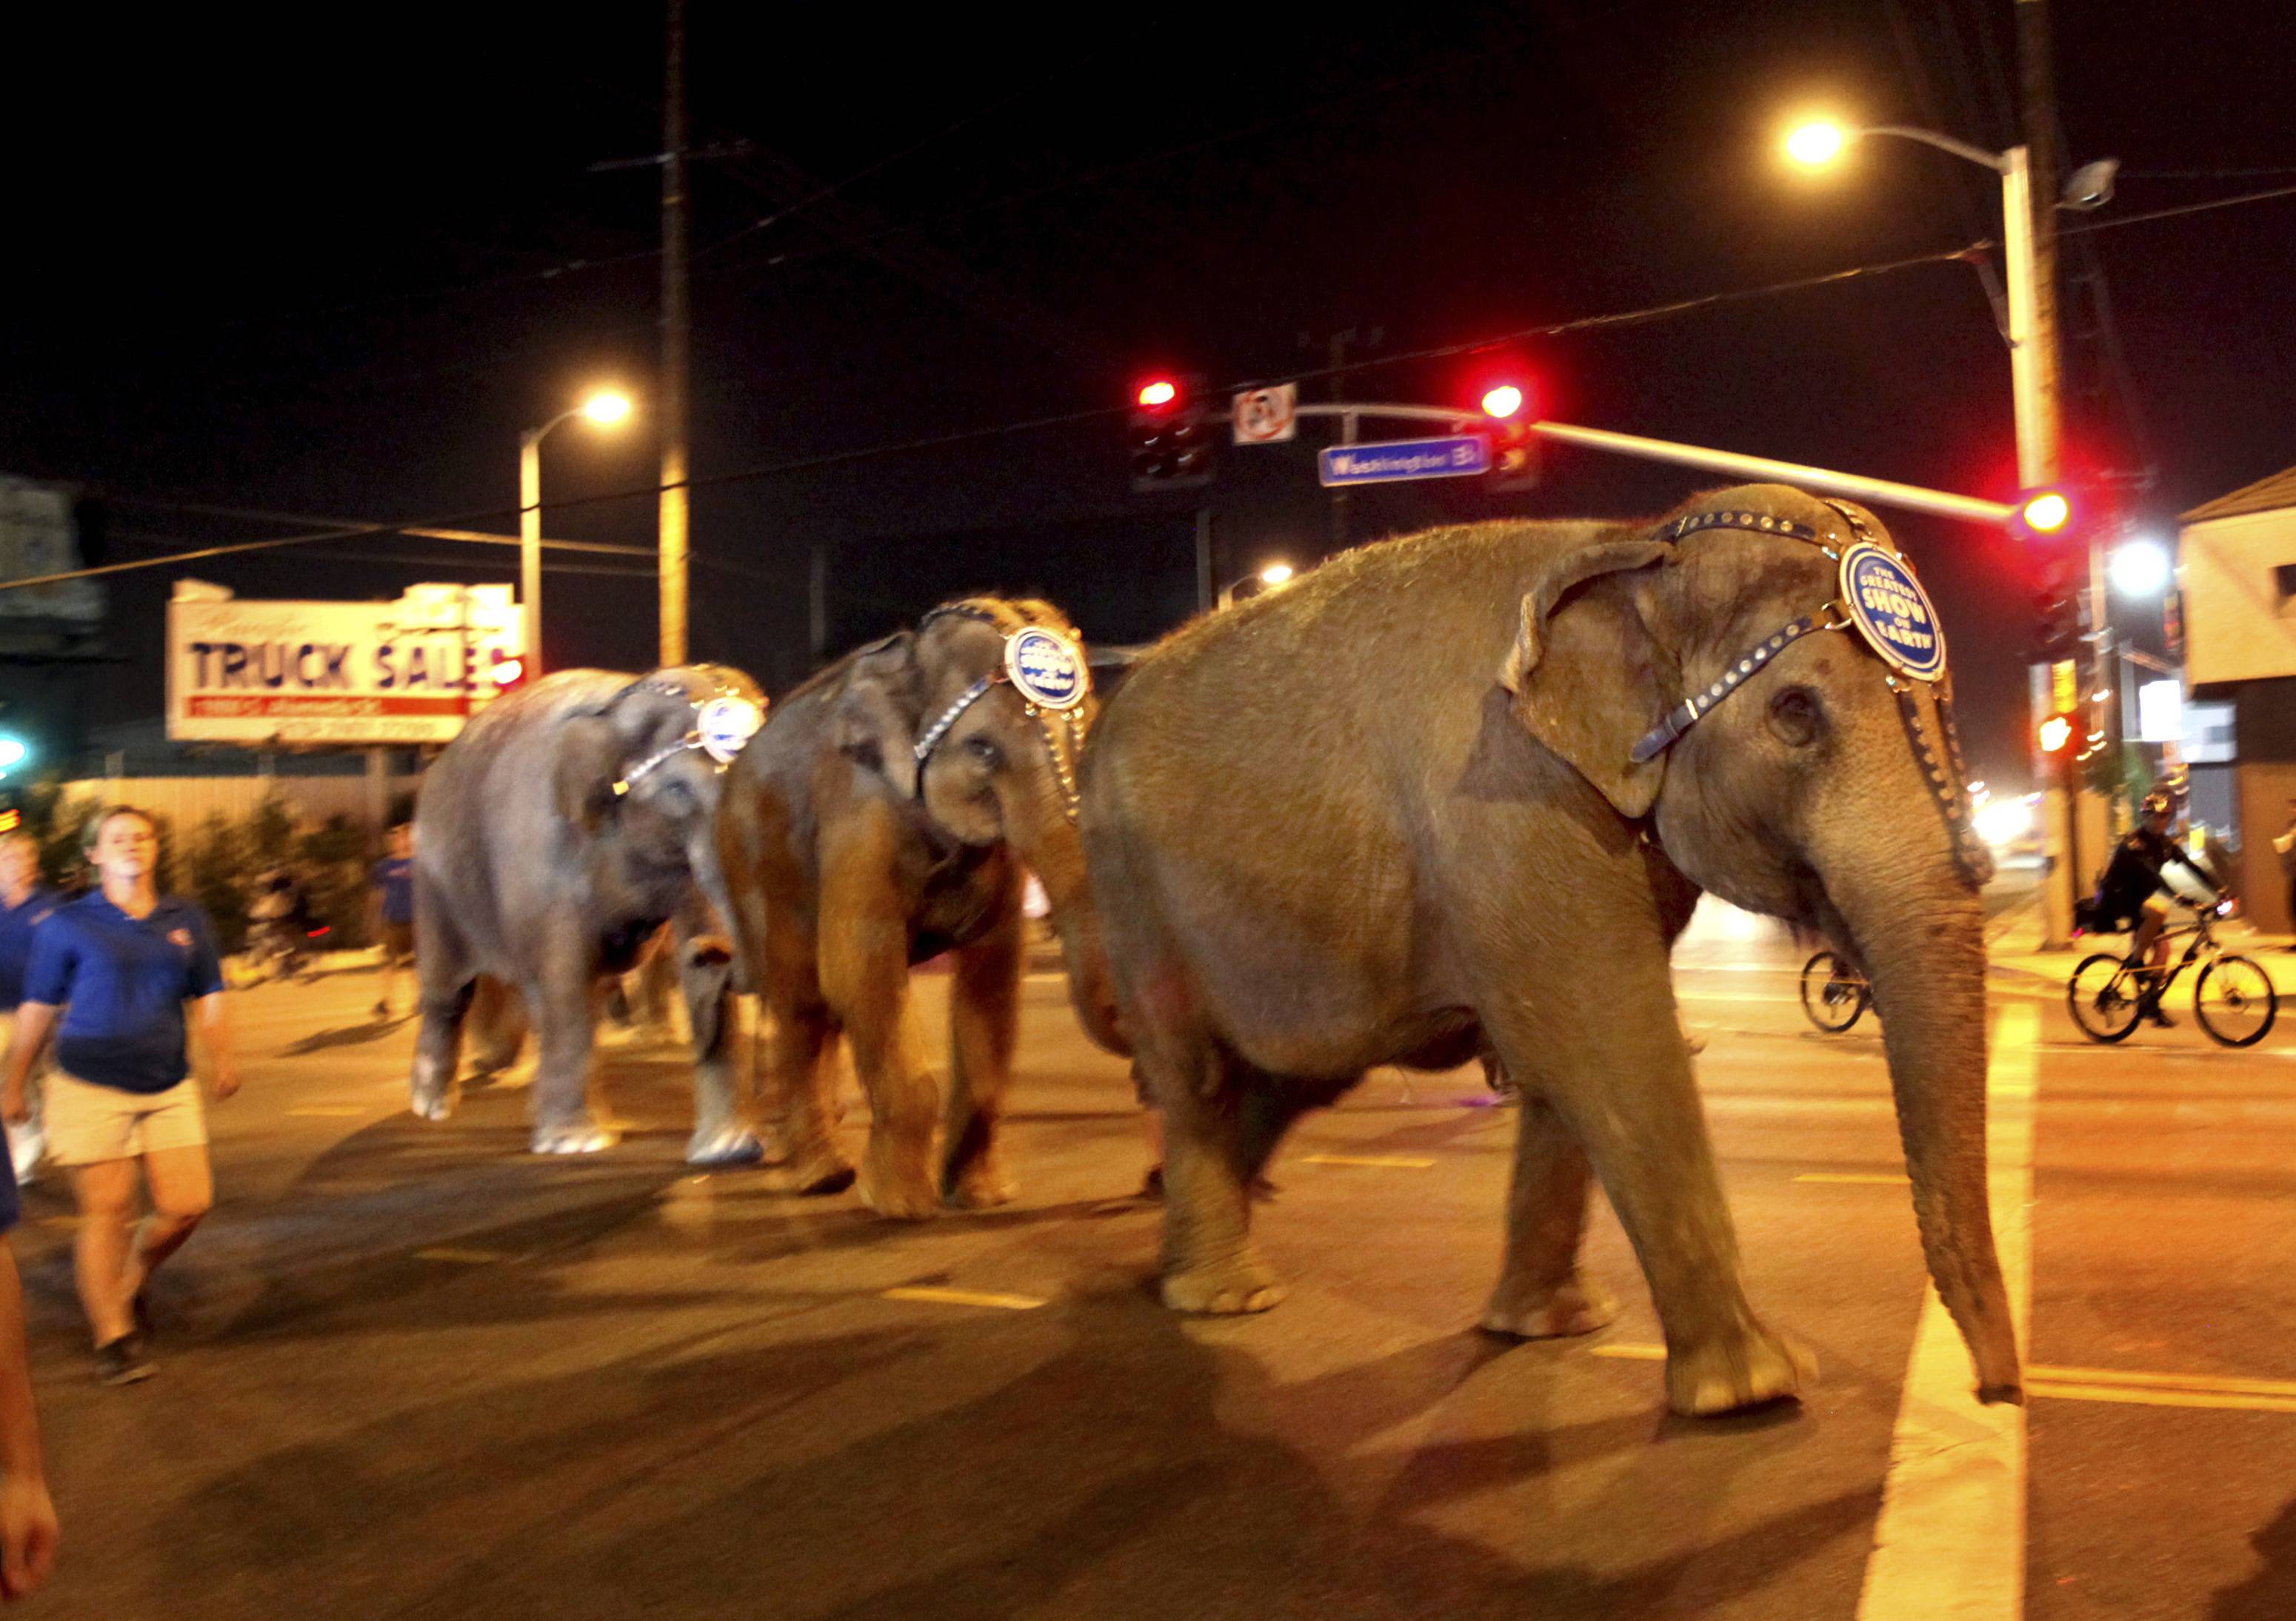 ASPCA to pay $ million to Ringling Bros. circus over claims about  elephants